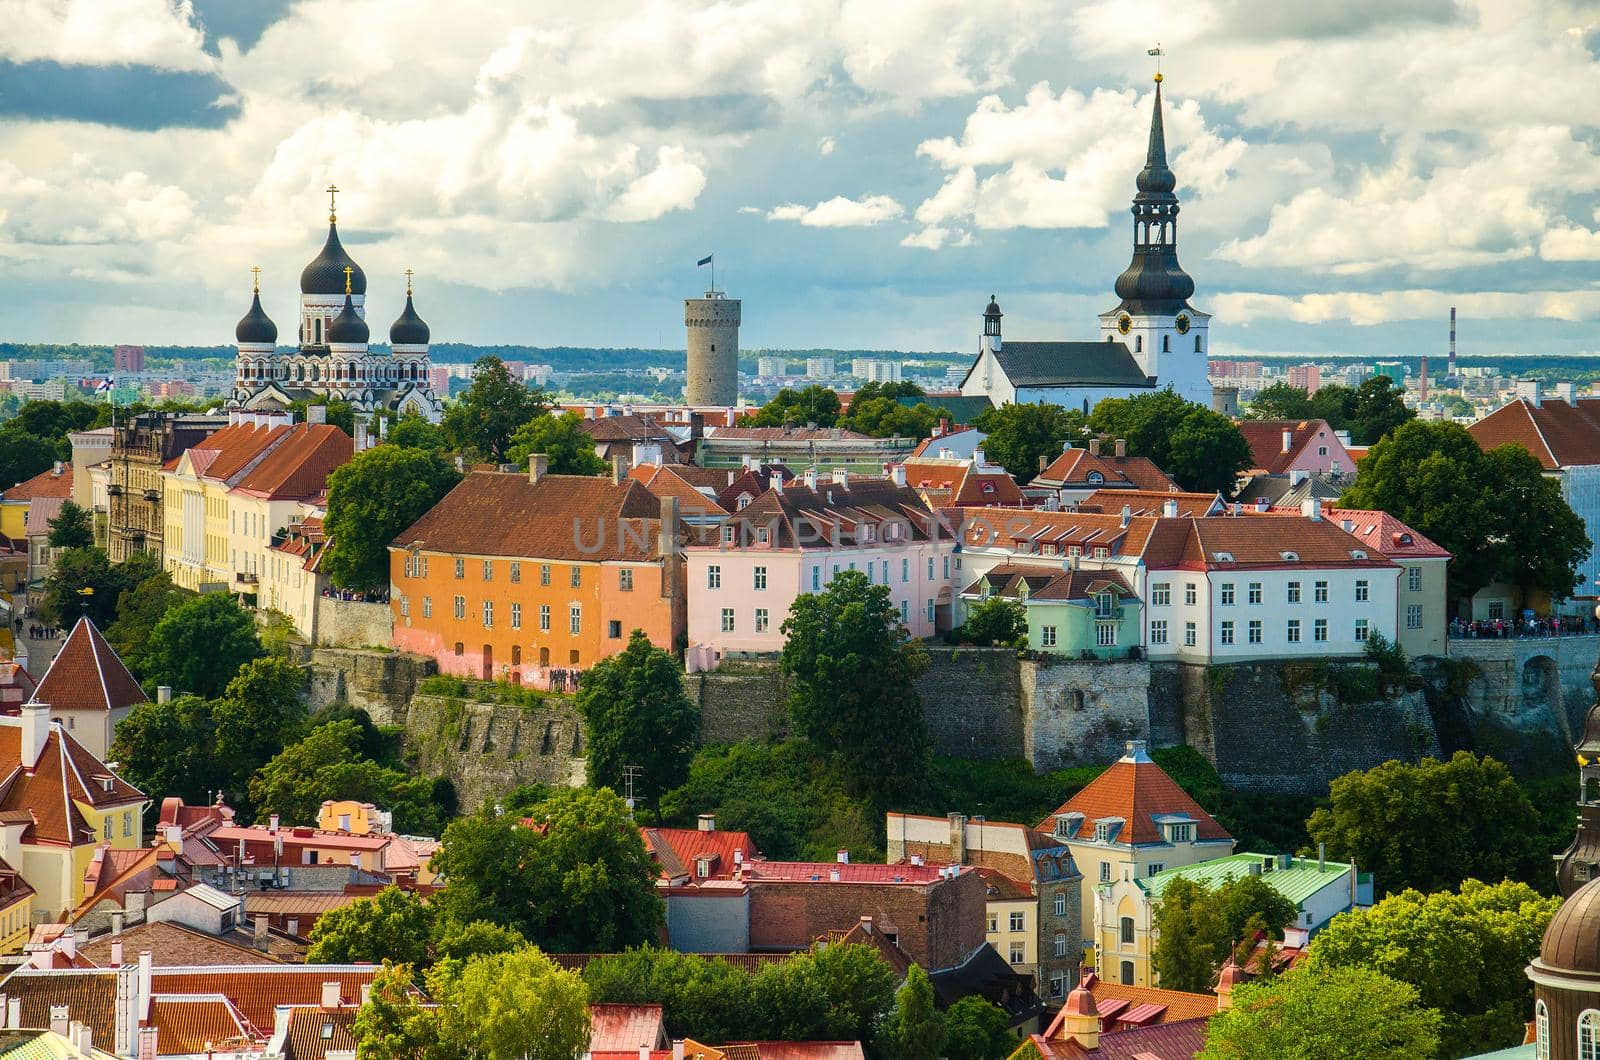 Panoramic view of Old Town of Tallinn with traditional red tile roofs, medieval churches, towers and walls, Toompea Hill from St. Olaf's Church Tower, Estonia